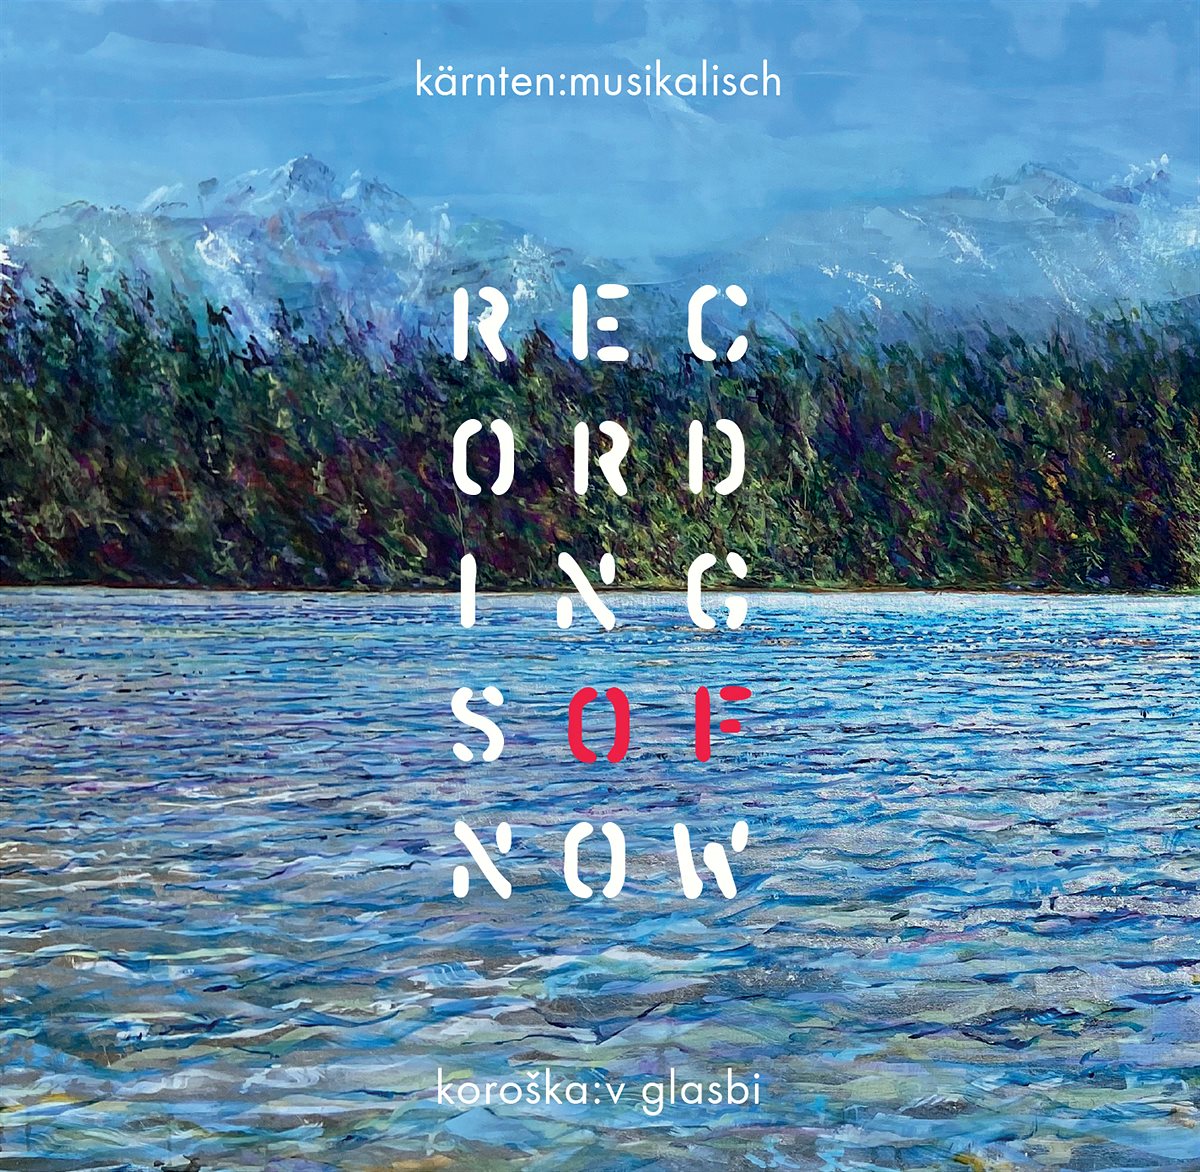 KKS_Recordings of now_Cover